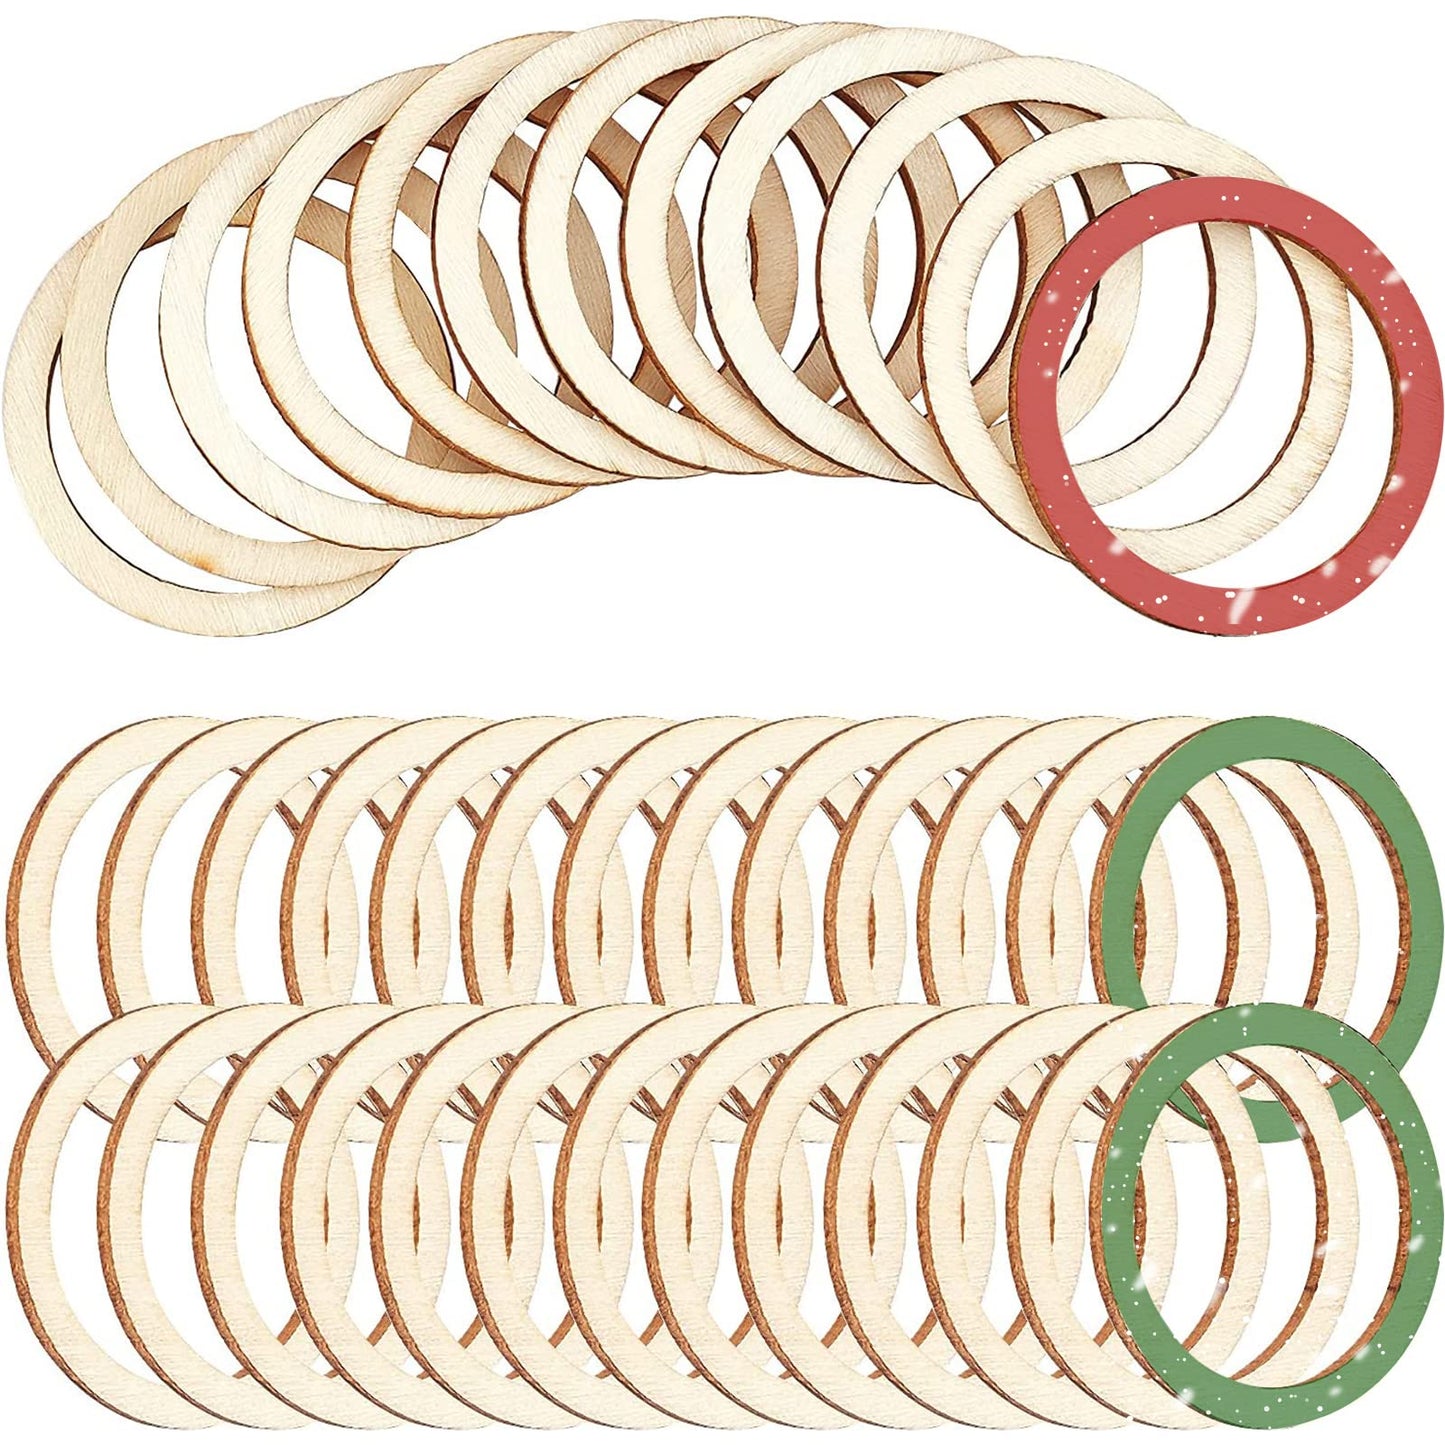 NBEADS 100 Pcs 1.96"/5cm Unfinished Wood Pieces Rings Shape, Circle Ornaments, Blank Wooden Slices for Christmas Painting, Pyrography, Home Decor